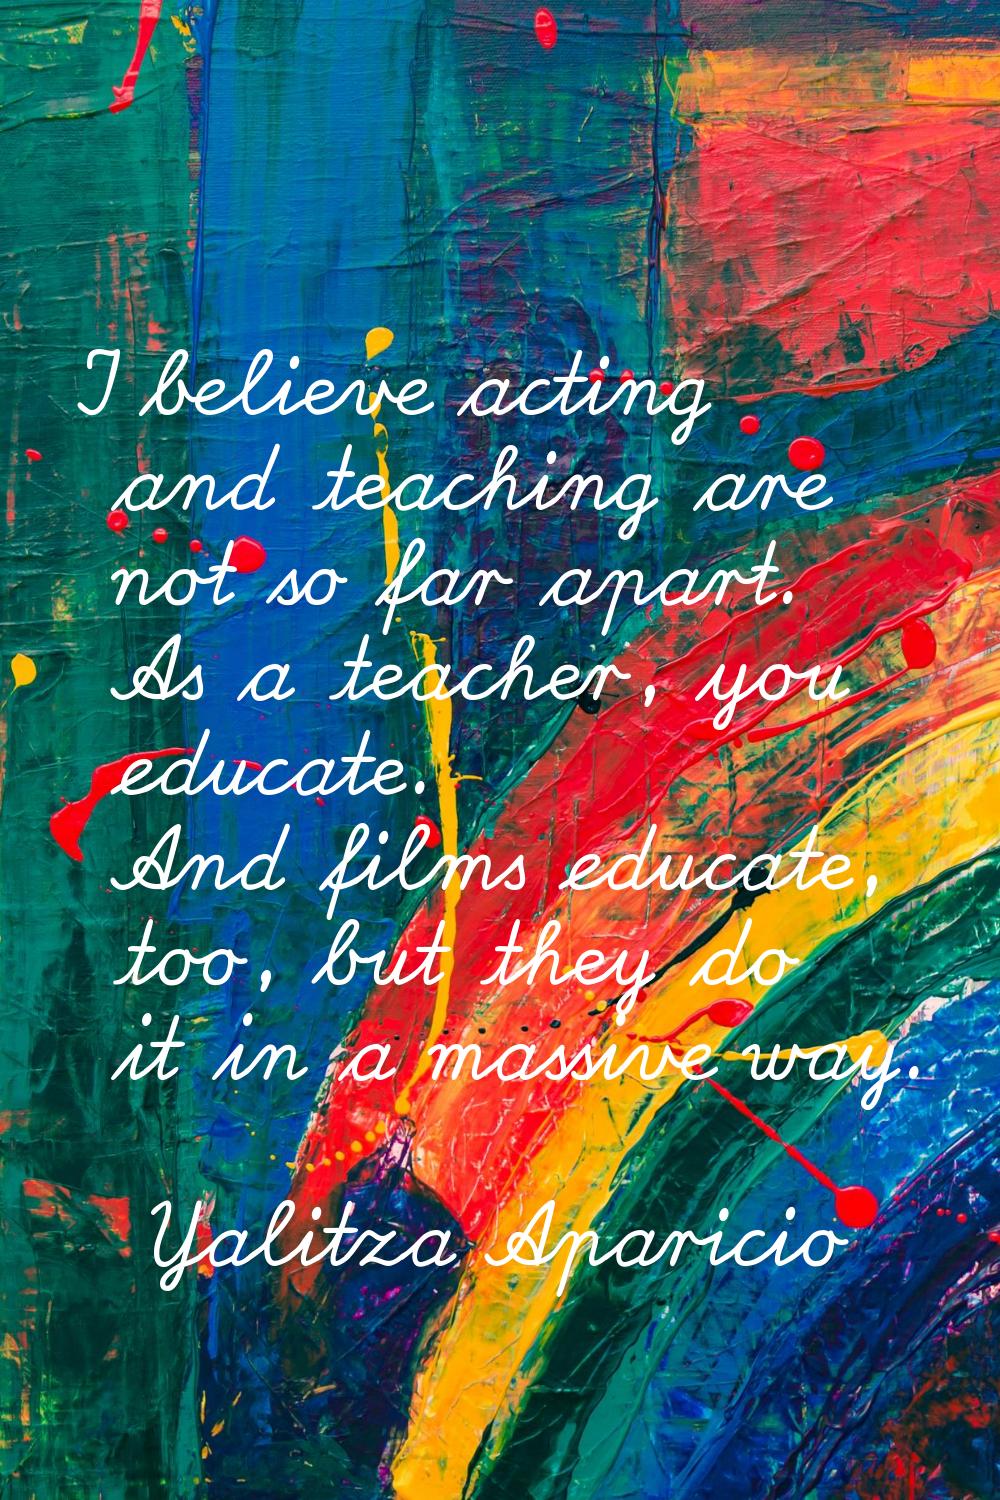 I believe acting and teaching are not so far apart. As a teacher, you educate. And films educate, t